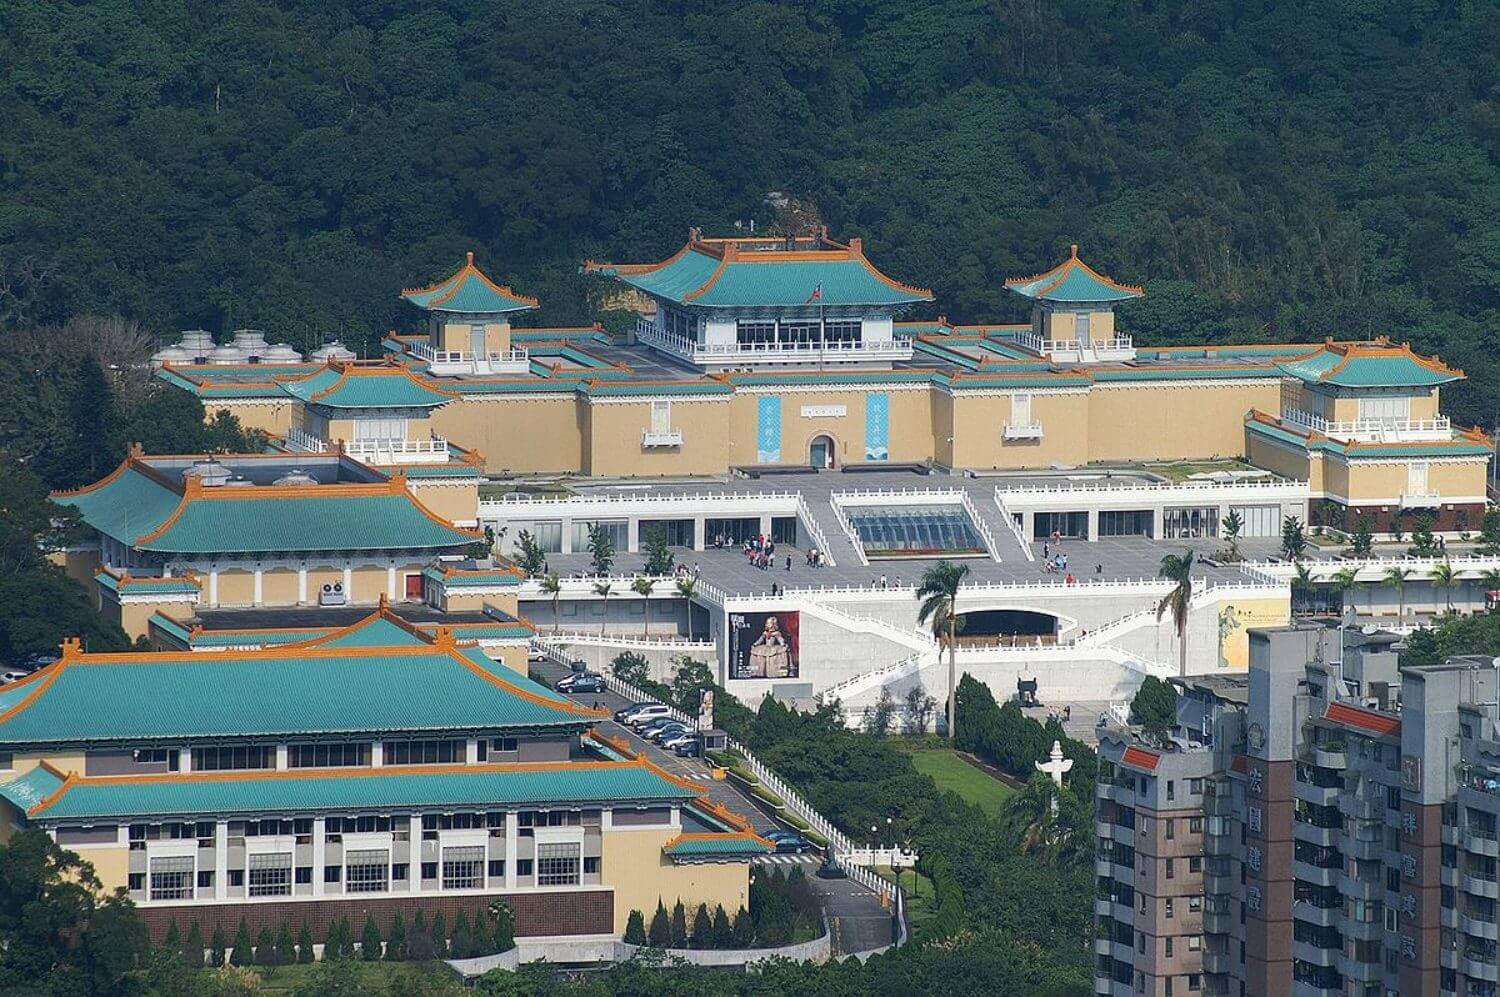 National Palace Museum - Photo Wikimedia Commons by Peellden